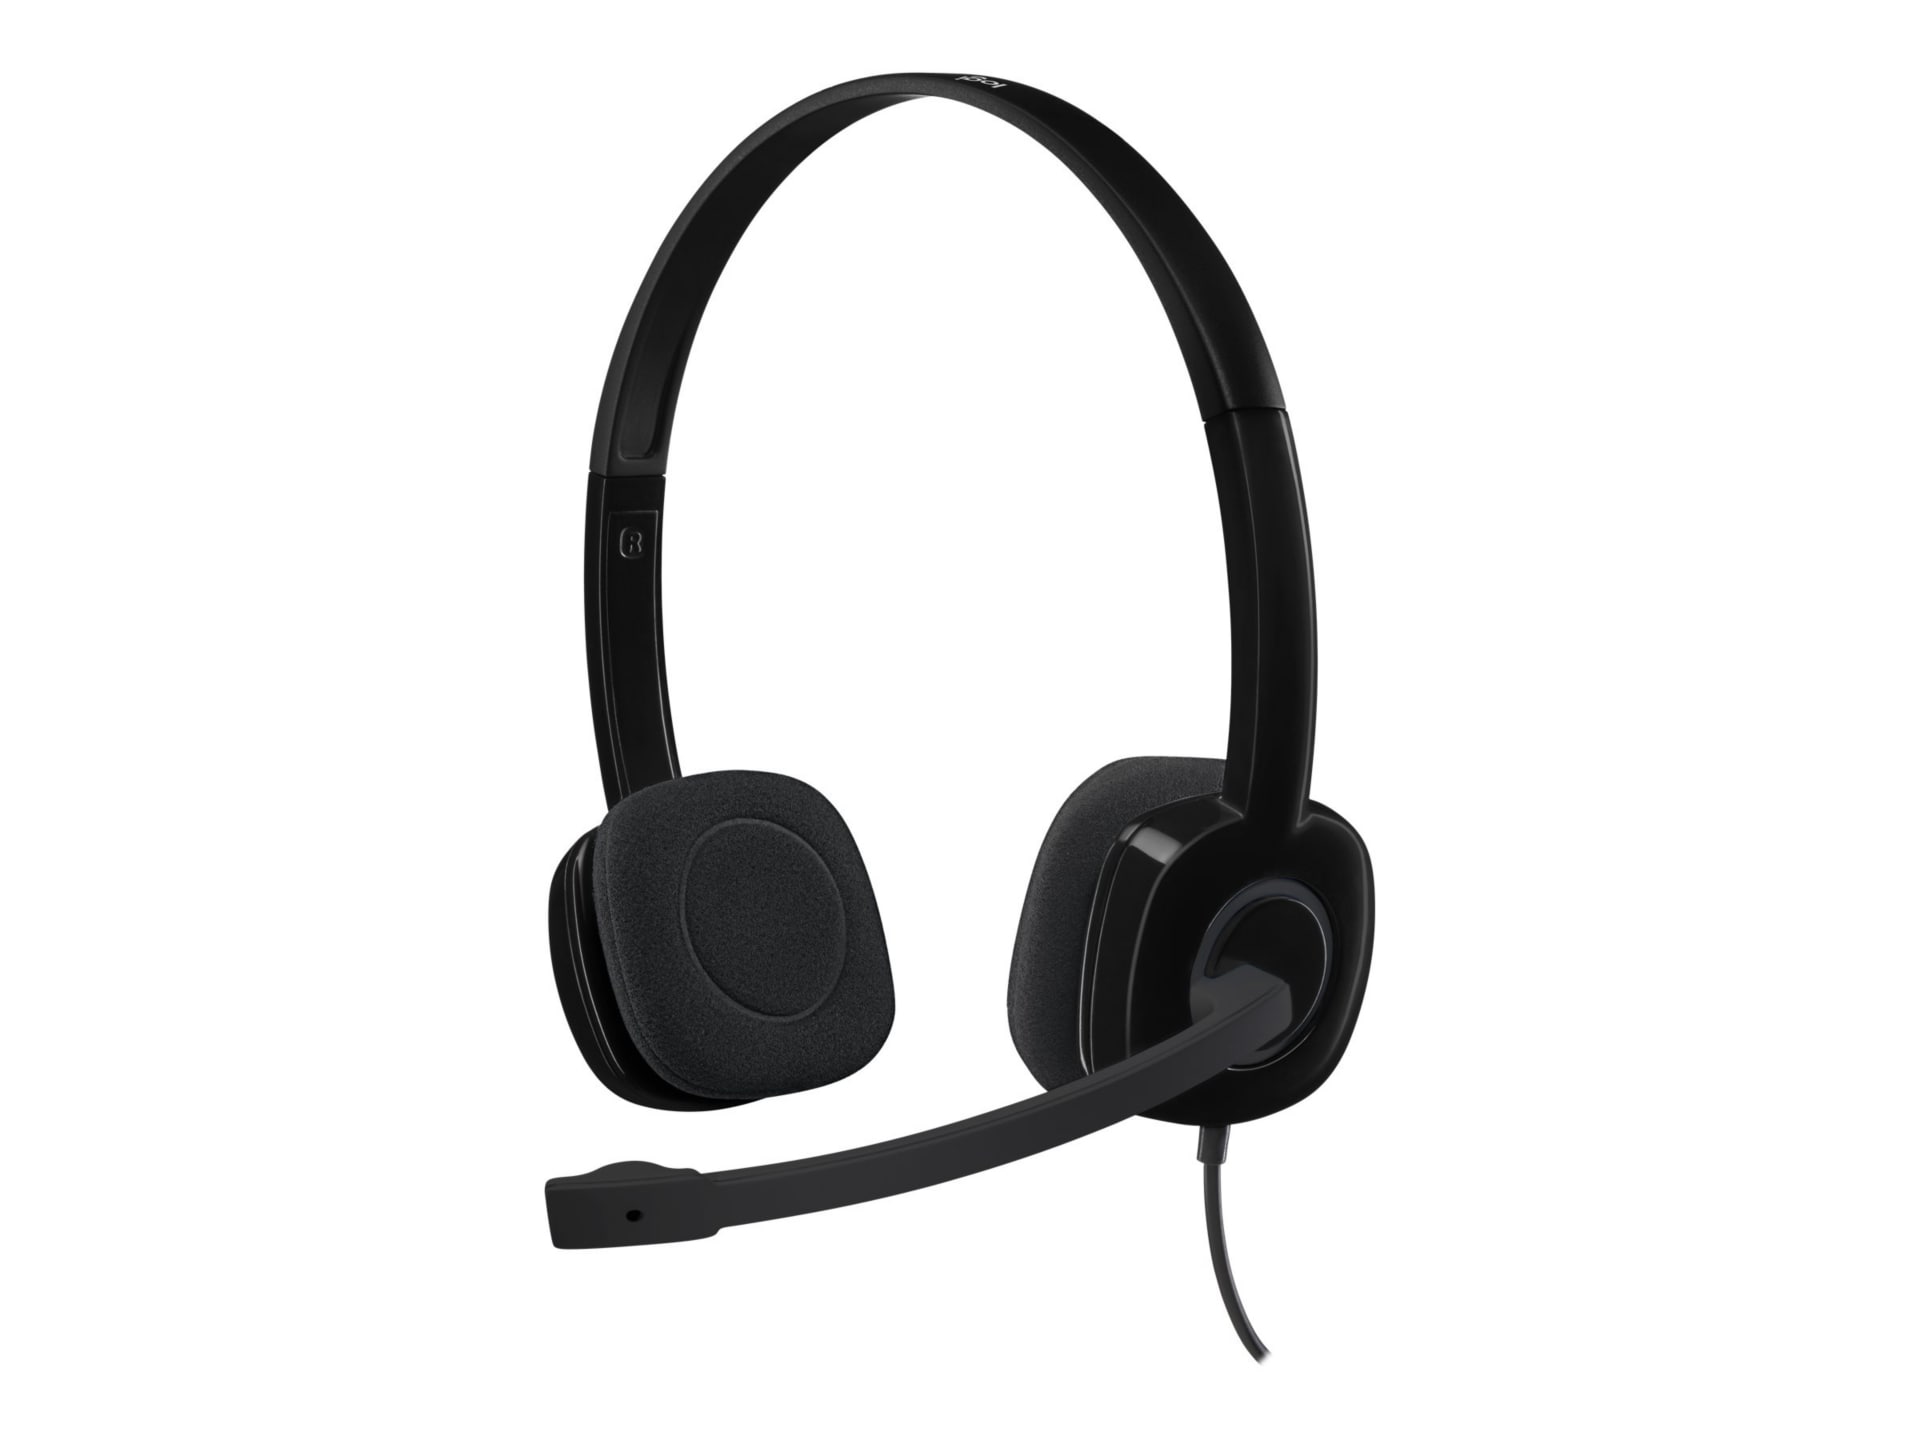 Logitech H151 Stereo Headset with Noise-Cancelling Mic - headset